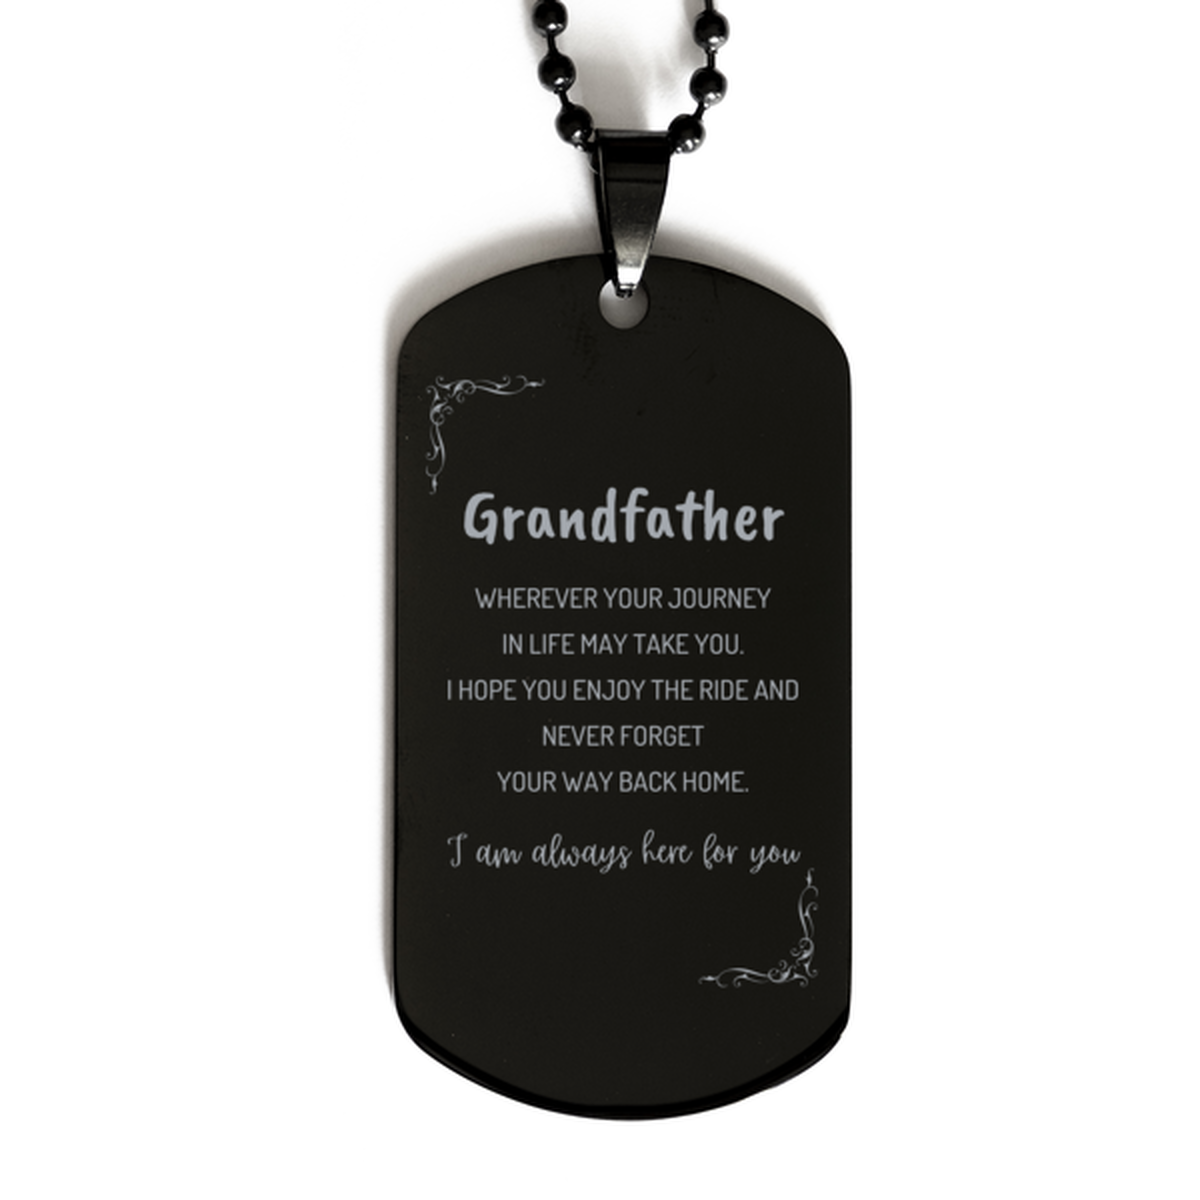 Grandfather wherever your journey in life may take you, I am always here for you Grandfather Black Dog Tag, Awesome Christmas Gifts For Grandfather, Grandfather Birthday Gifts for Men Women Family Loved One